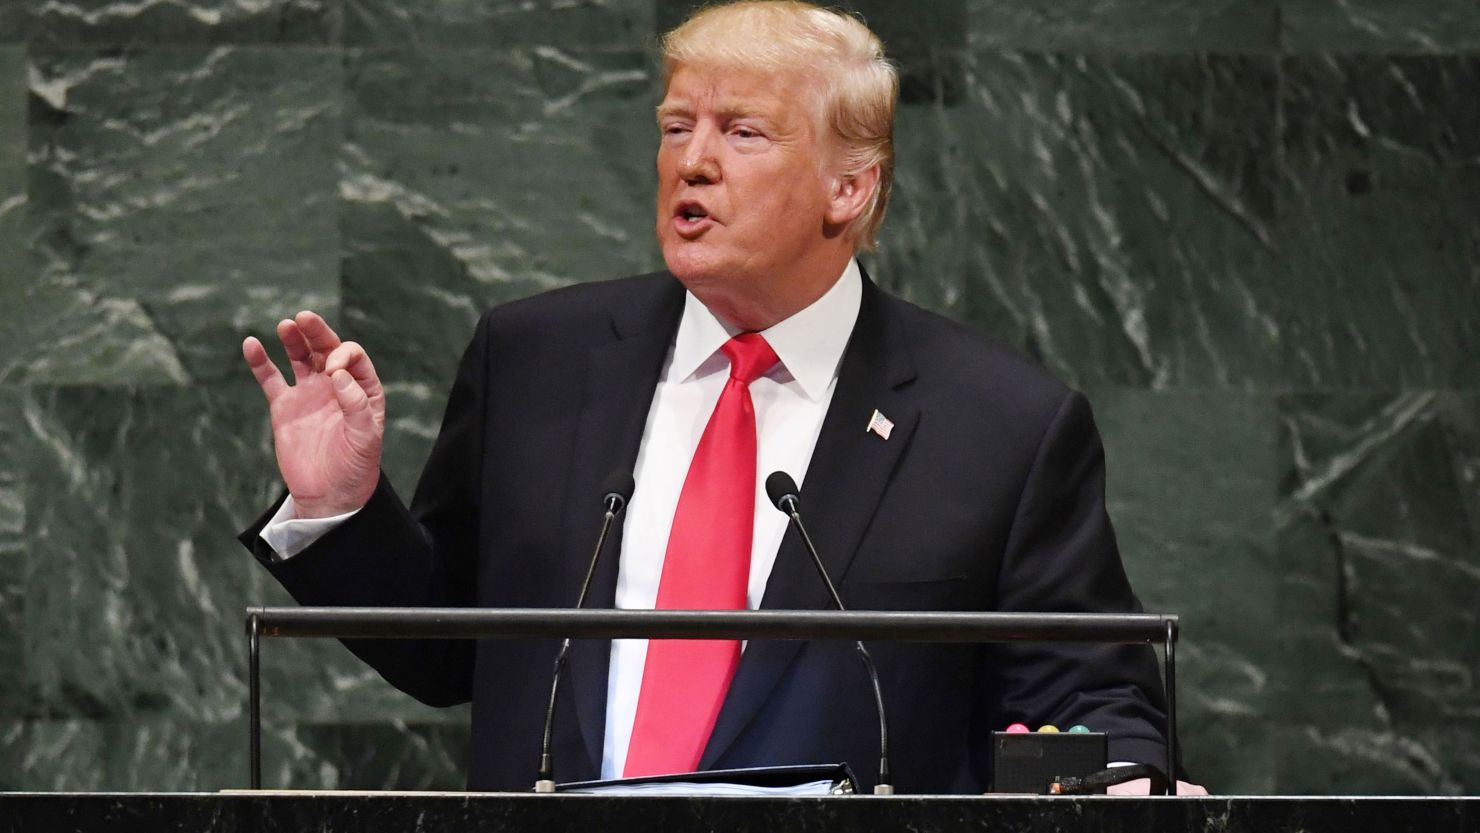 US President Donald Trump speaks during the General Debate of the 73rd session of the General Assembly at the United Nations in New York September 25, 2018. (Photo by TIMOTHY A. CLARY / AFP)        (Photo credit should read TIMOTHY A. CLARY/AFP/Getty Images)